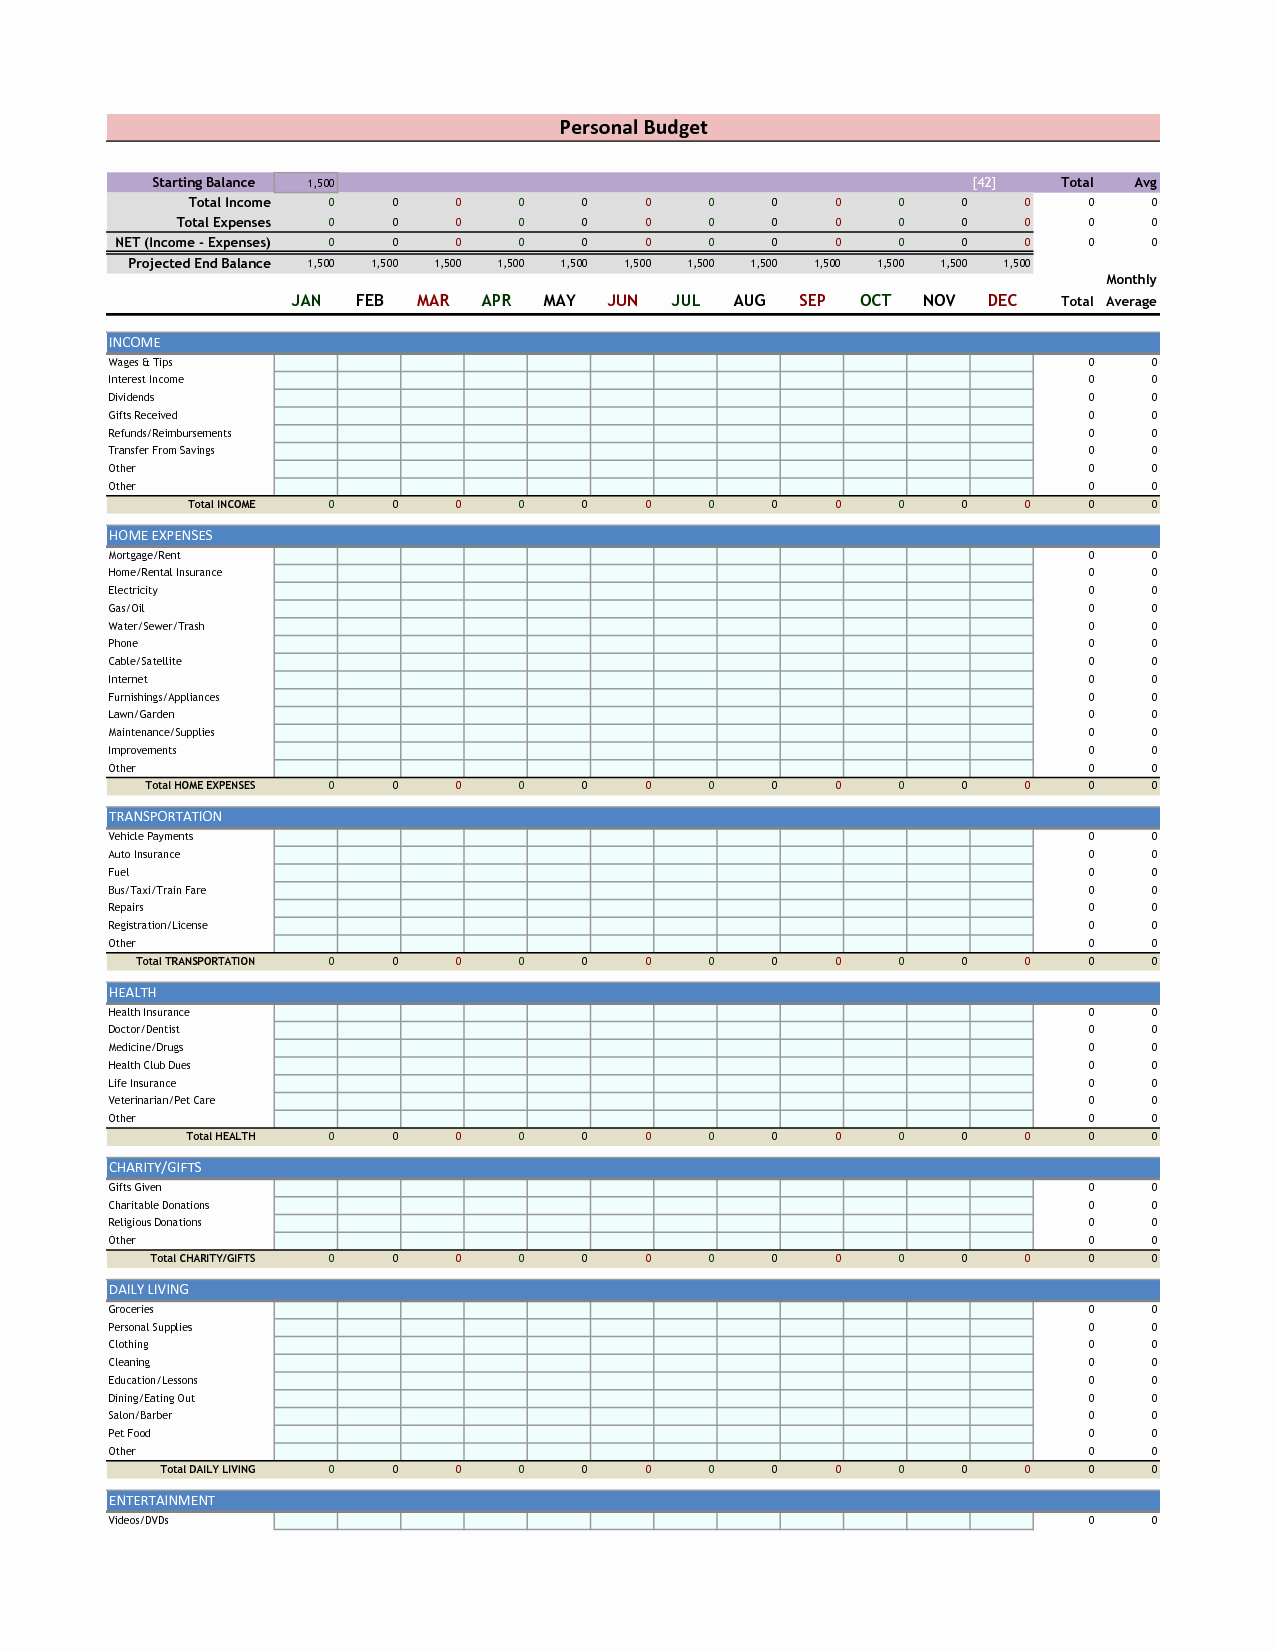 Personal Budget Planning Template New Personal Bud Excel Template Free Excel Bud